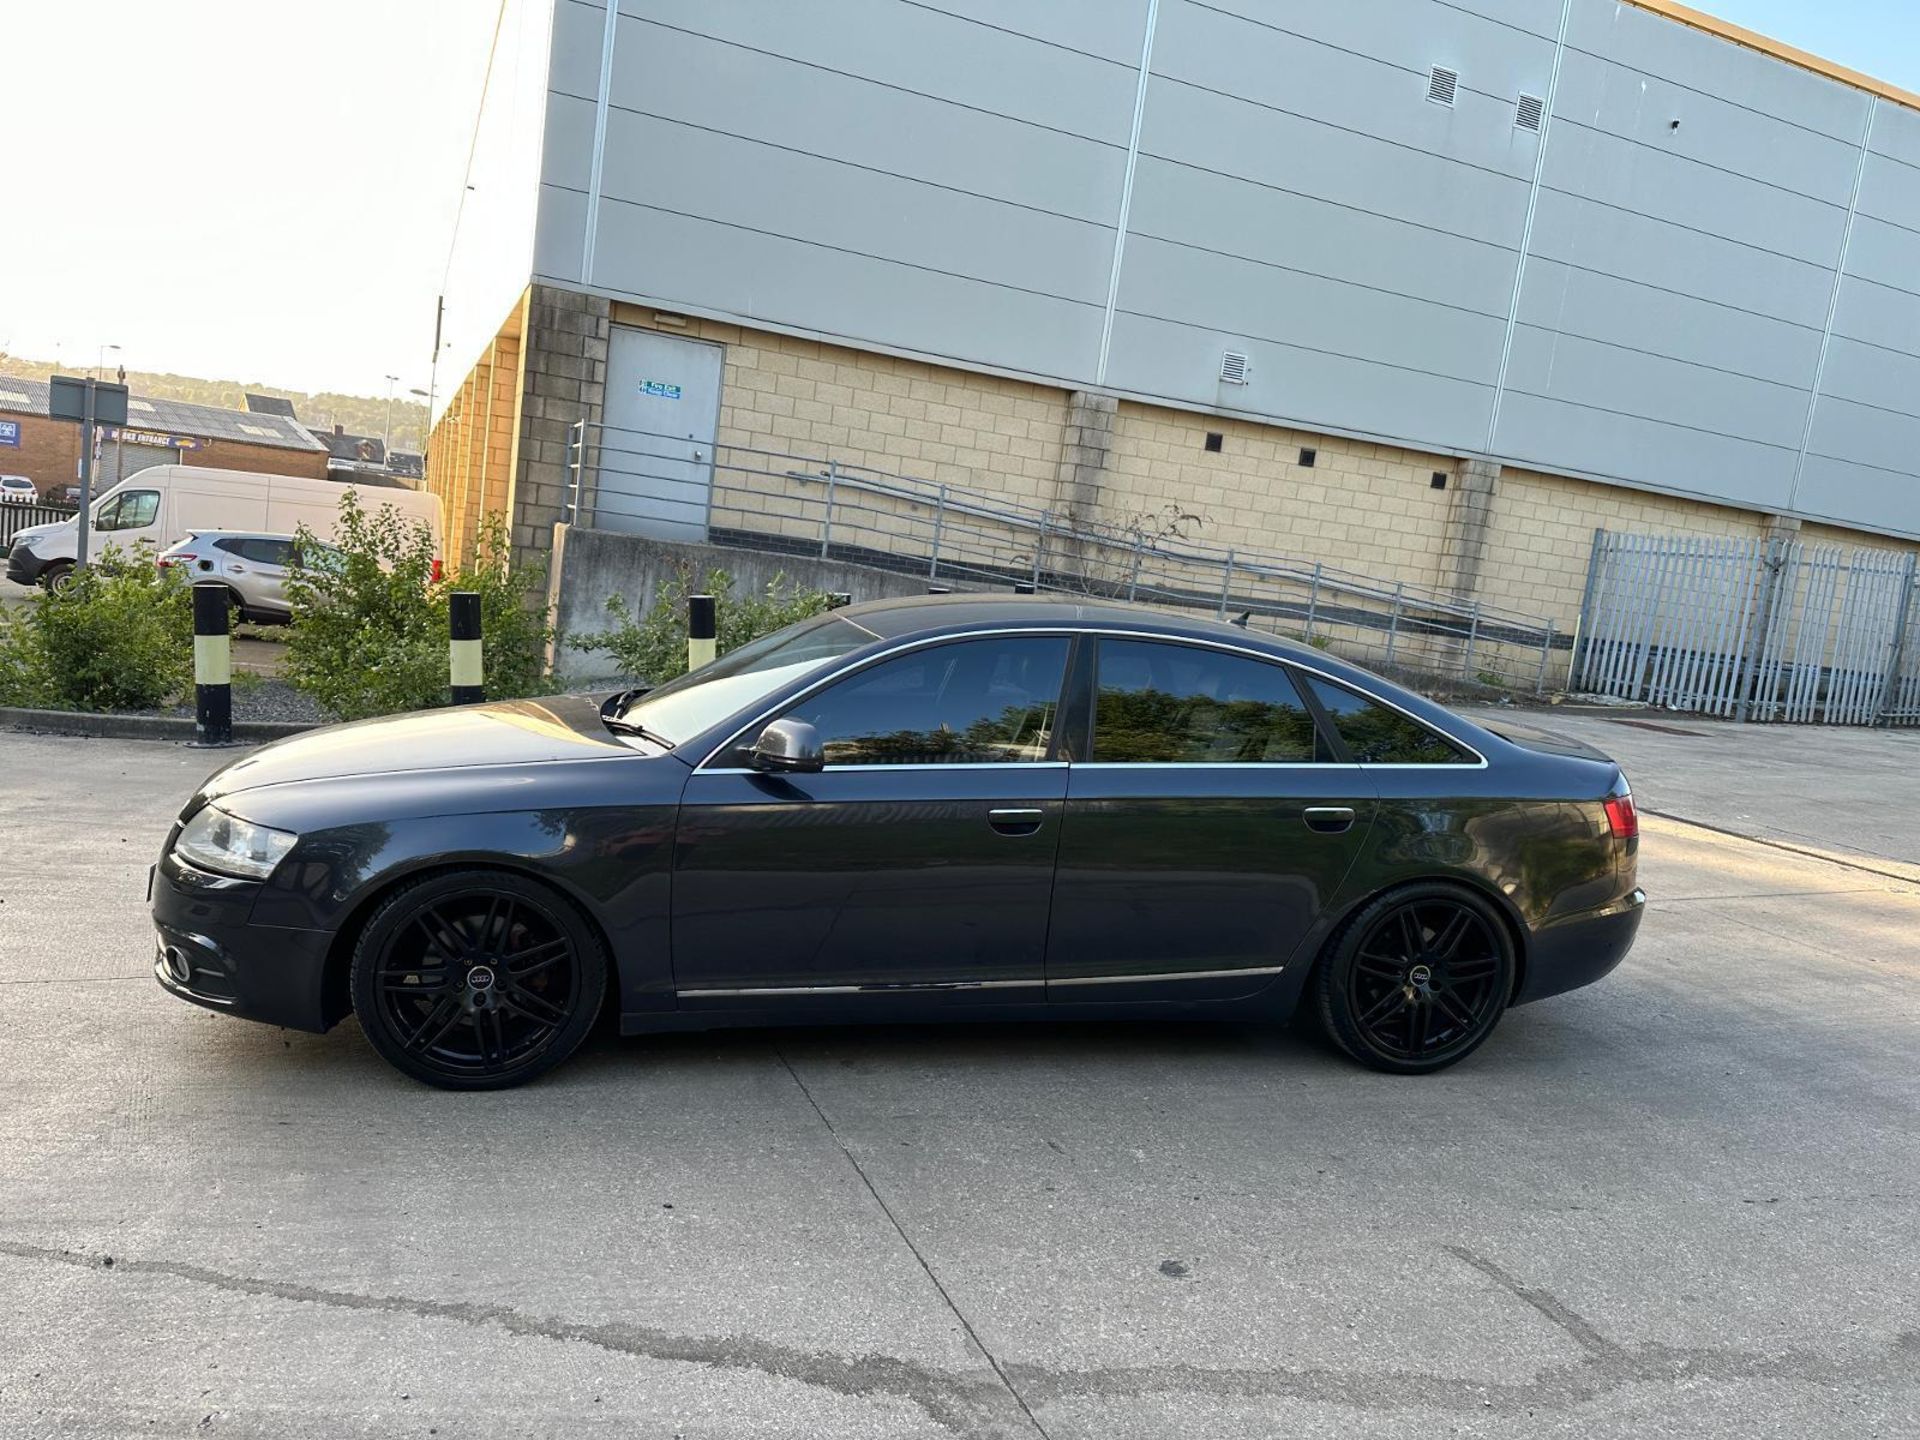 TECH-SAVVY AUDI A6: ON-BOARD COMPUTER AND MORE 4 DOOR SALOON GREY AUTOMATIC (NO VAT ON HAMMER